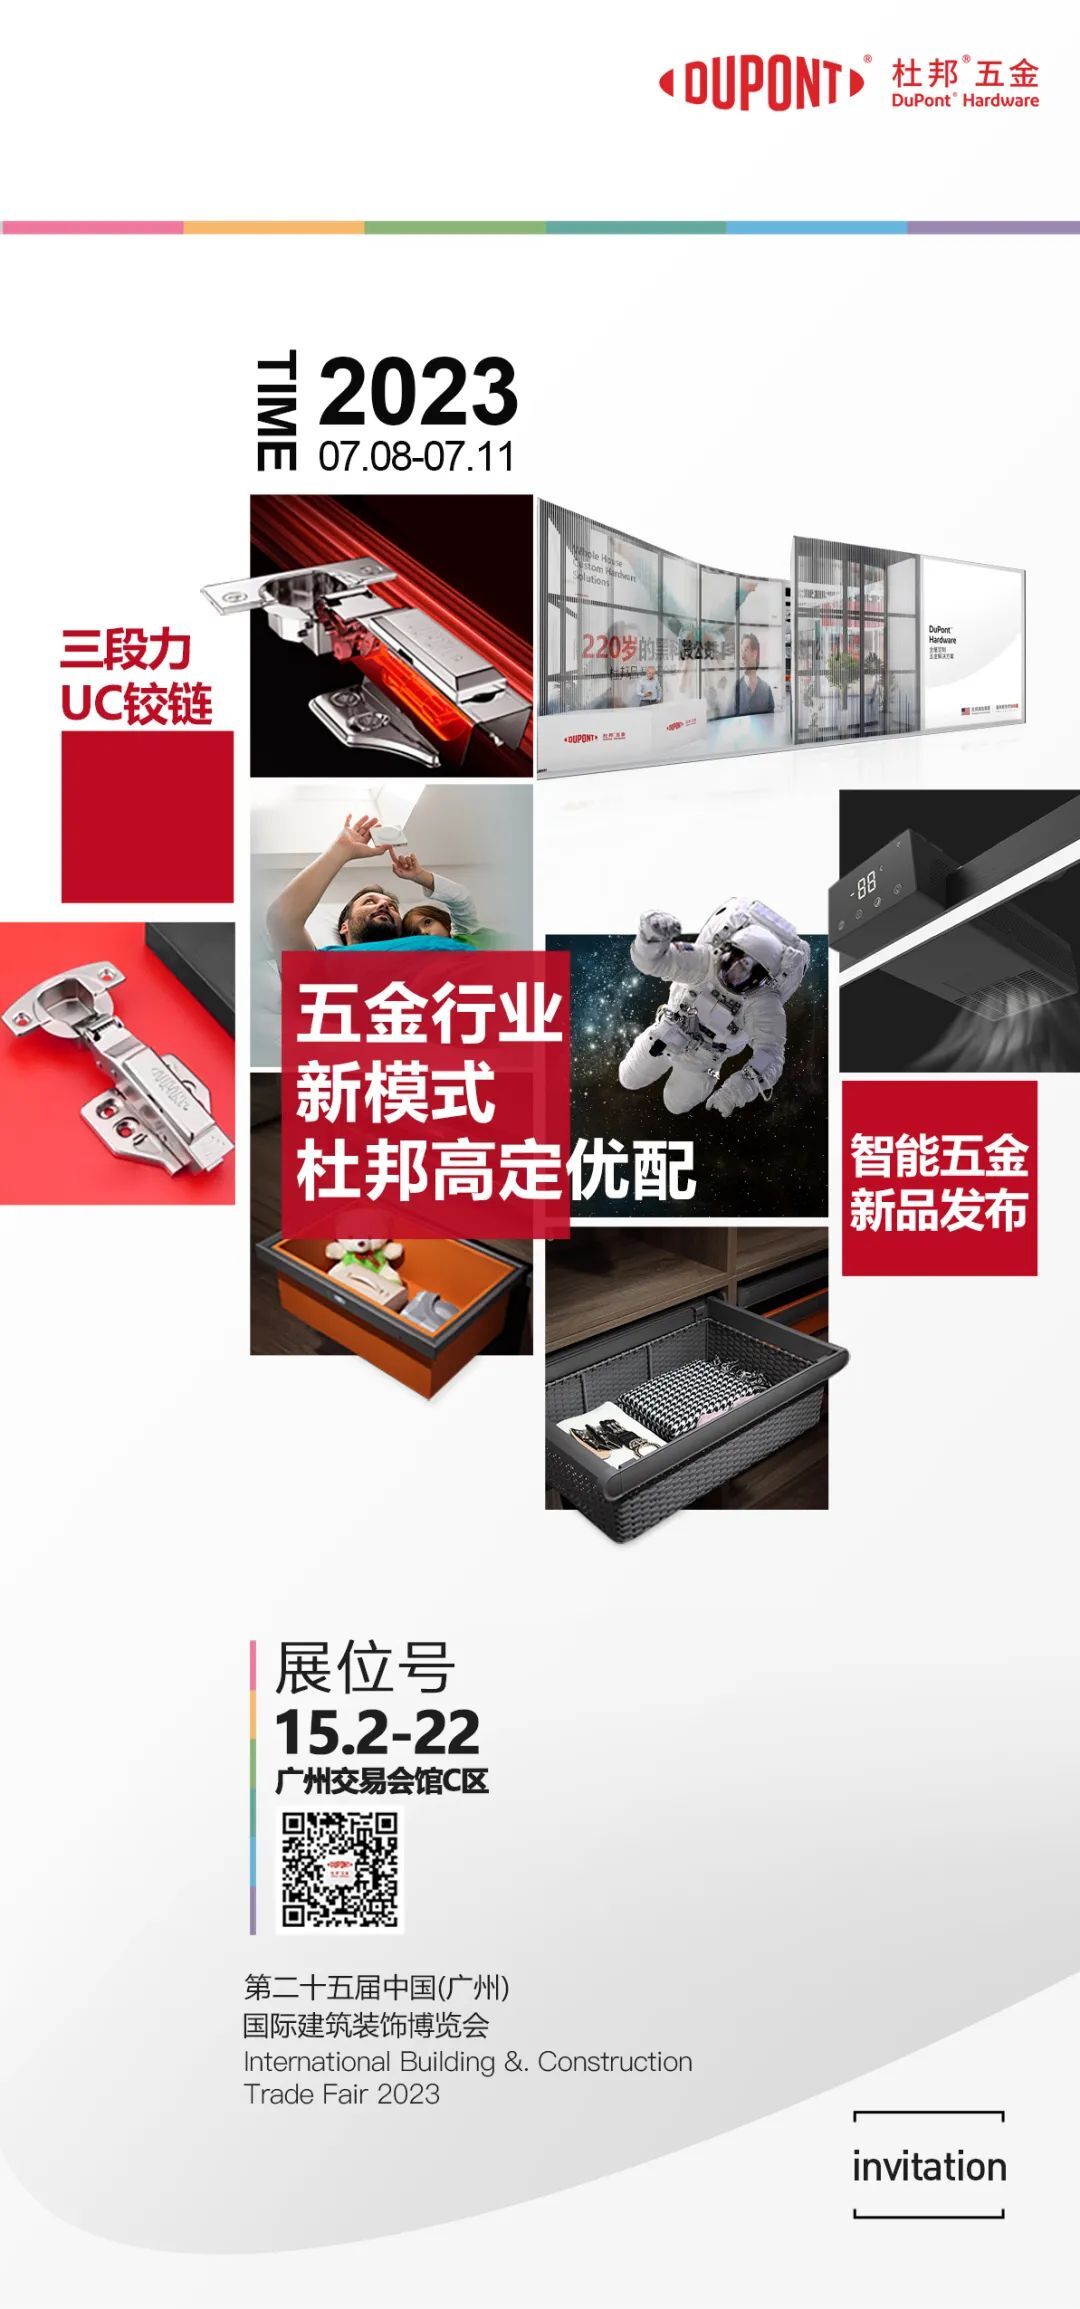 High Dingxin Trend | DuPont Hardware's "2023 Intelligent Hardware" New Product Announced Simultaneously with Guangzhou Construction Expo